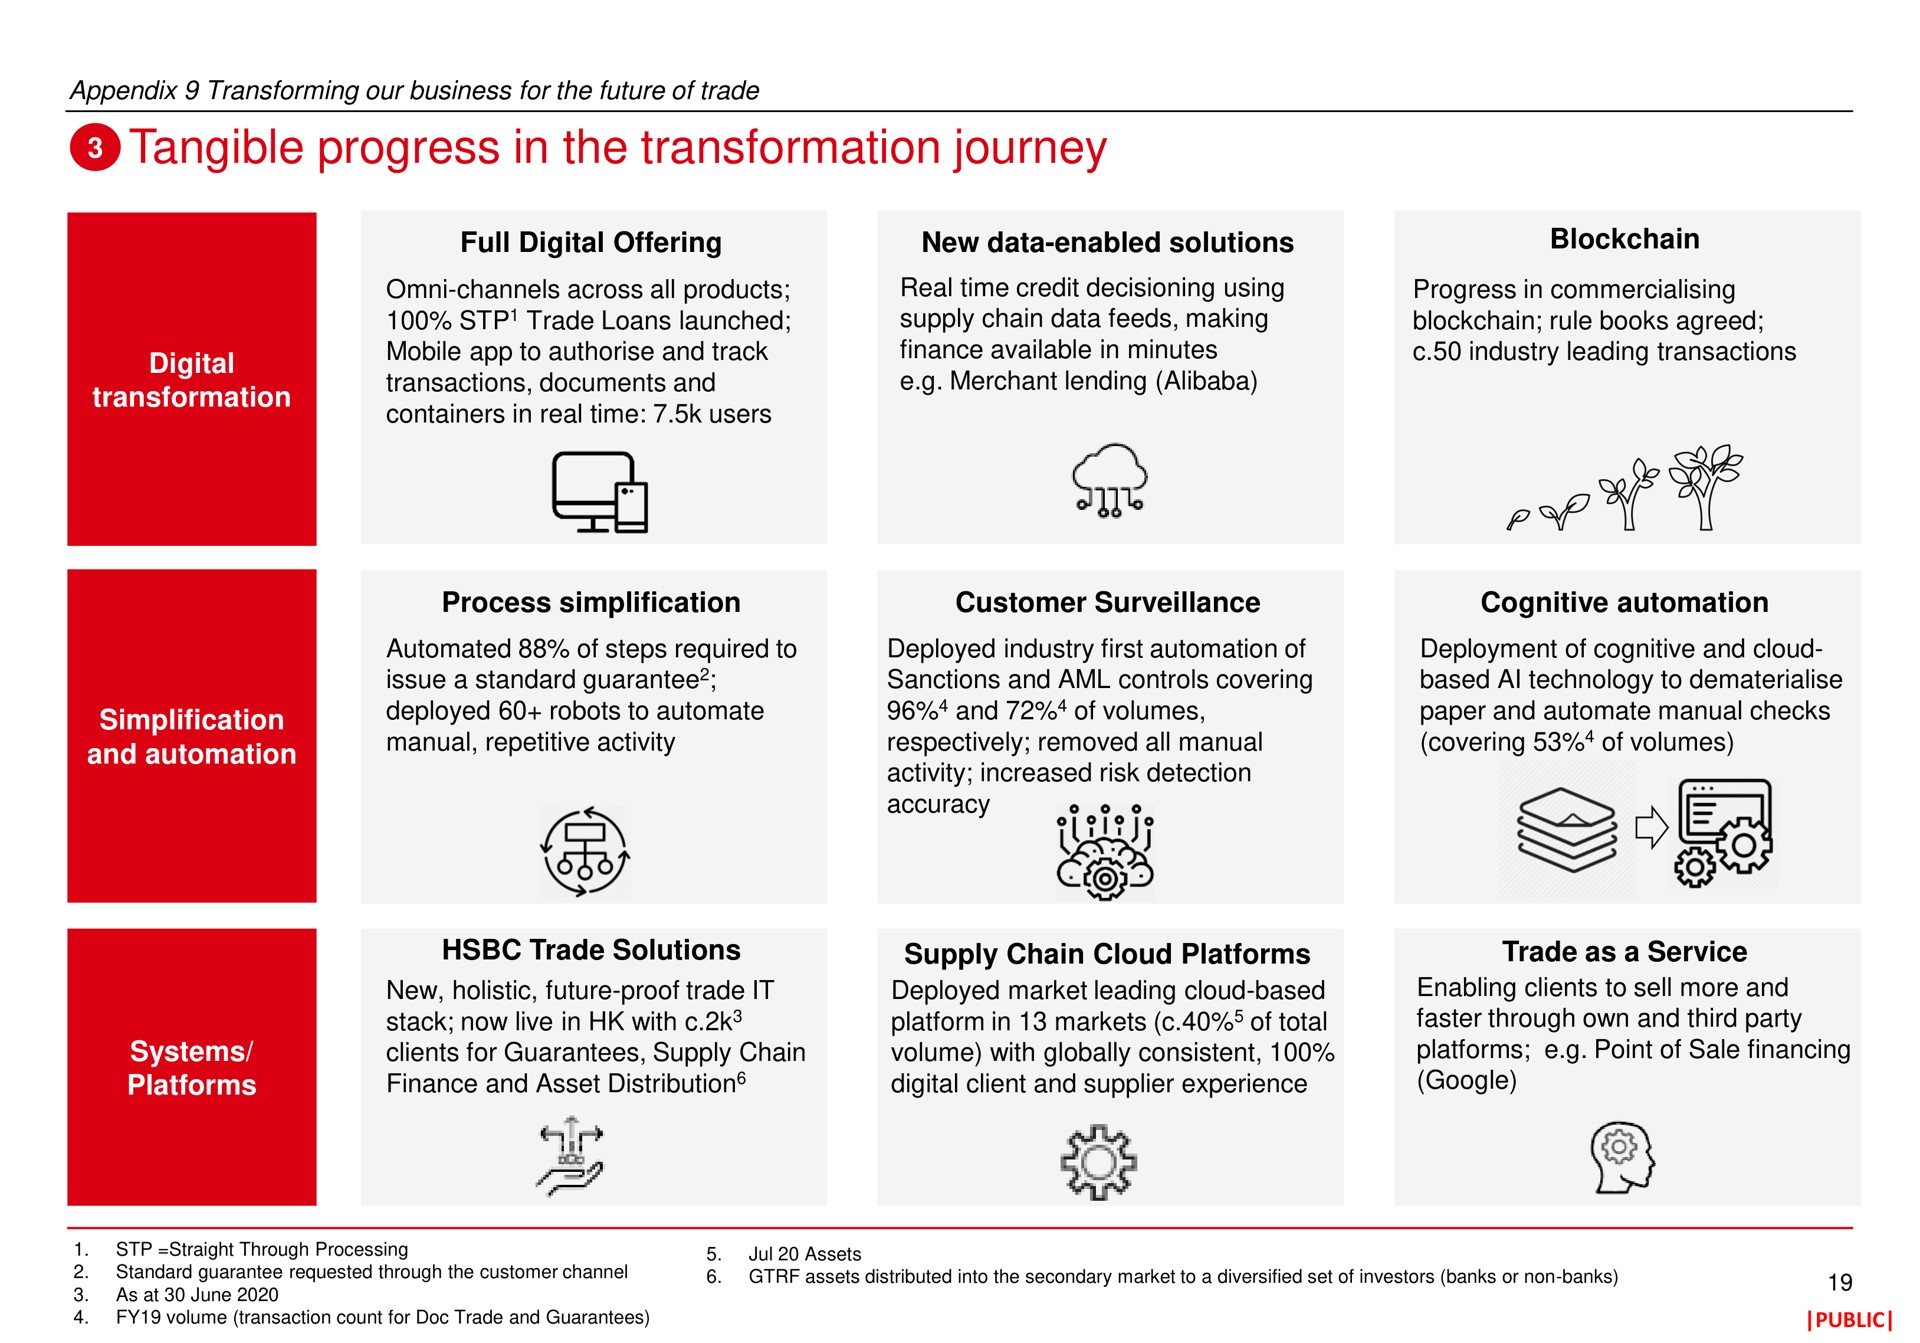 tangible progress in the transformation journey sue nee a | HSBC